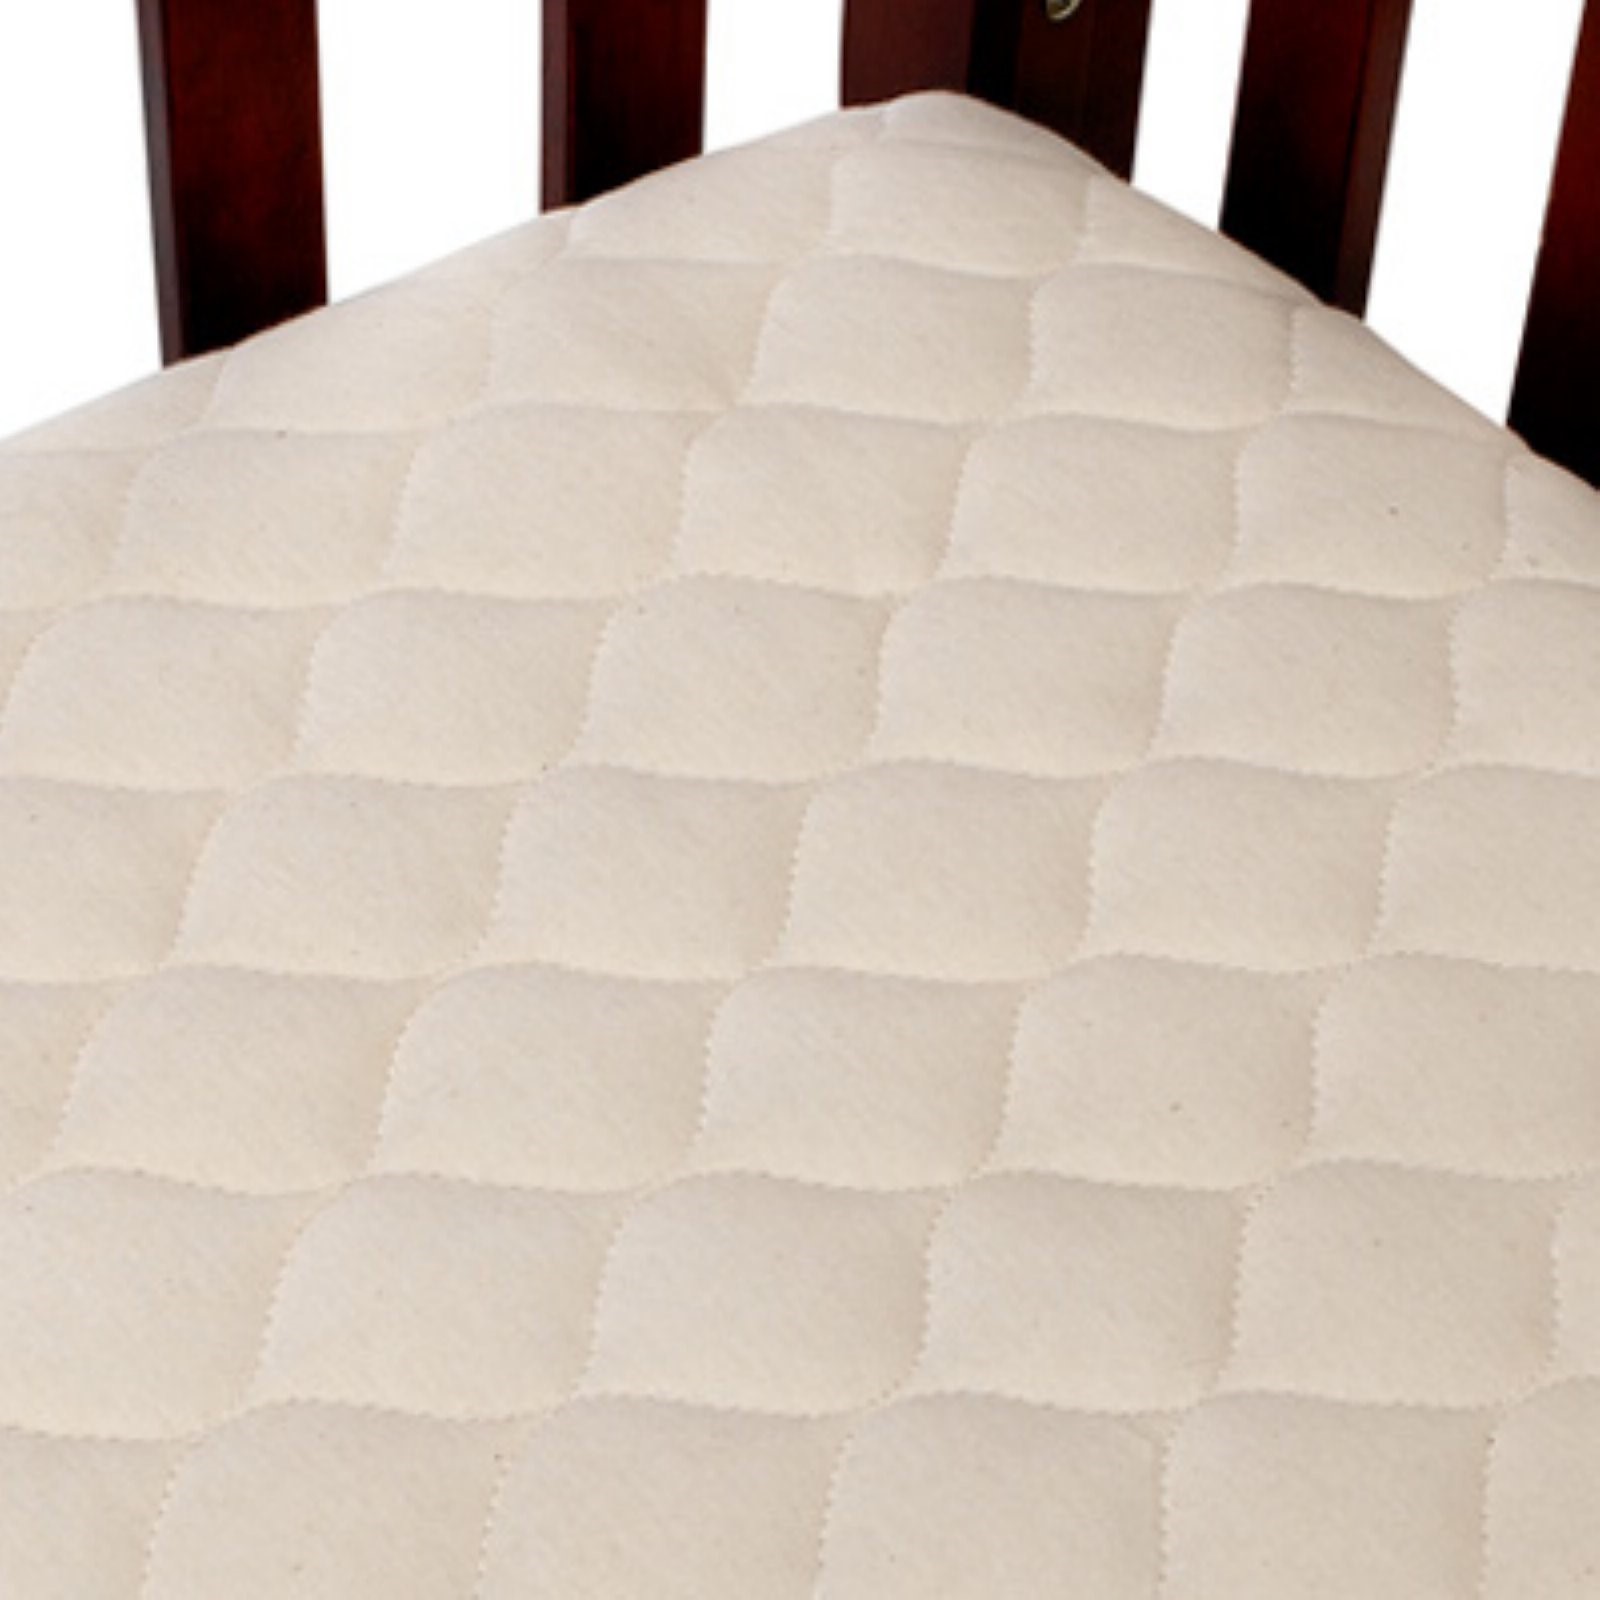 American Baby Company Waterproof Quilted Fitted Portable/Mini Crib pad cover made with Organic Cotton Top Layer, Natural Color - image 1 of 4